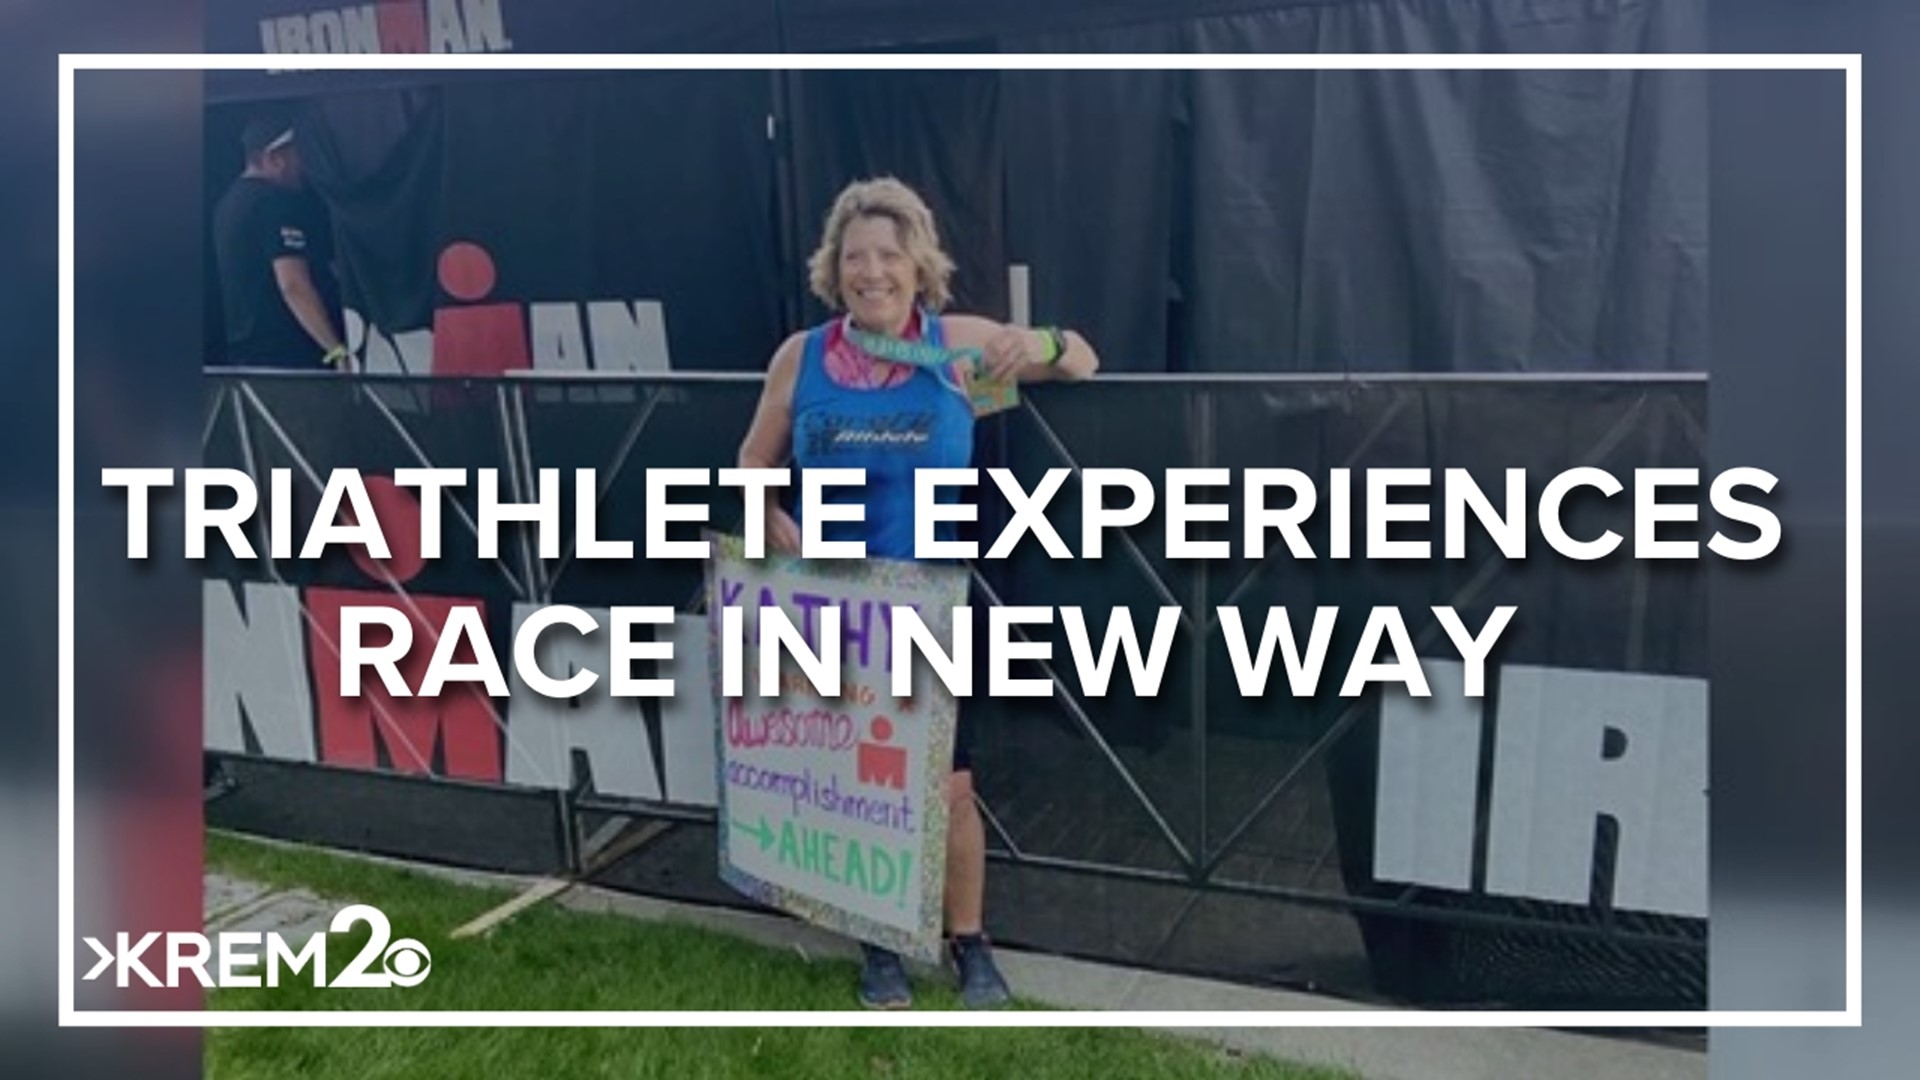 Greer began running triathlons over two years ago. Since then, she has crossed the finish line for the Half Ironman’s in Indian Wells, California and in Alberta.